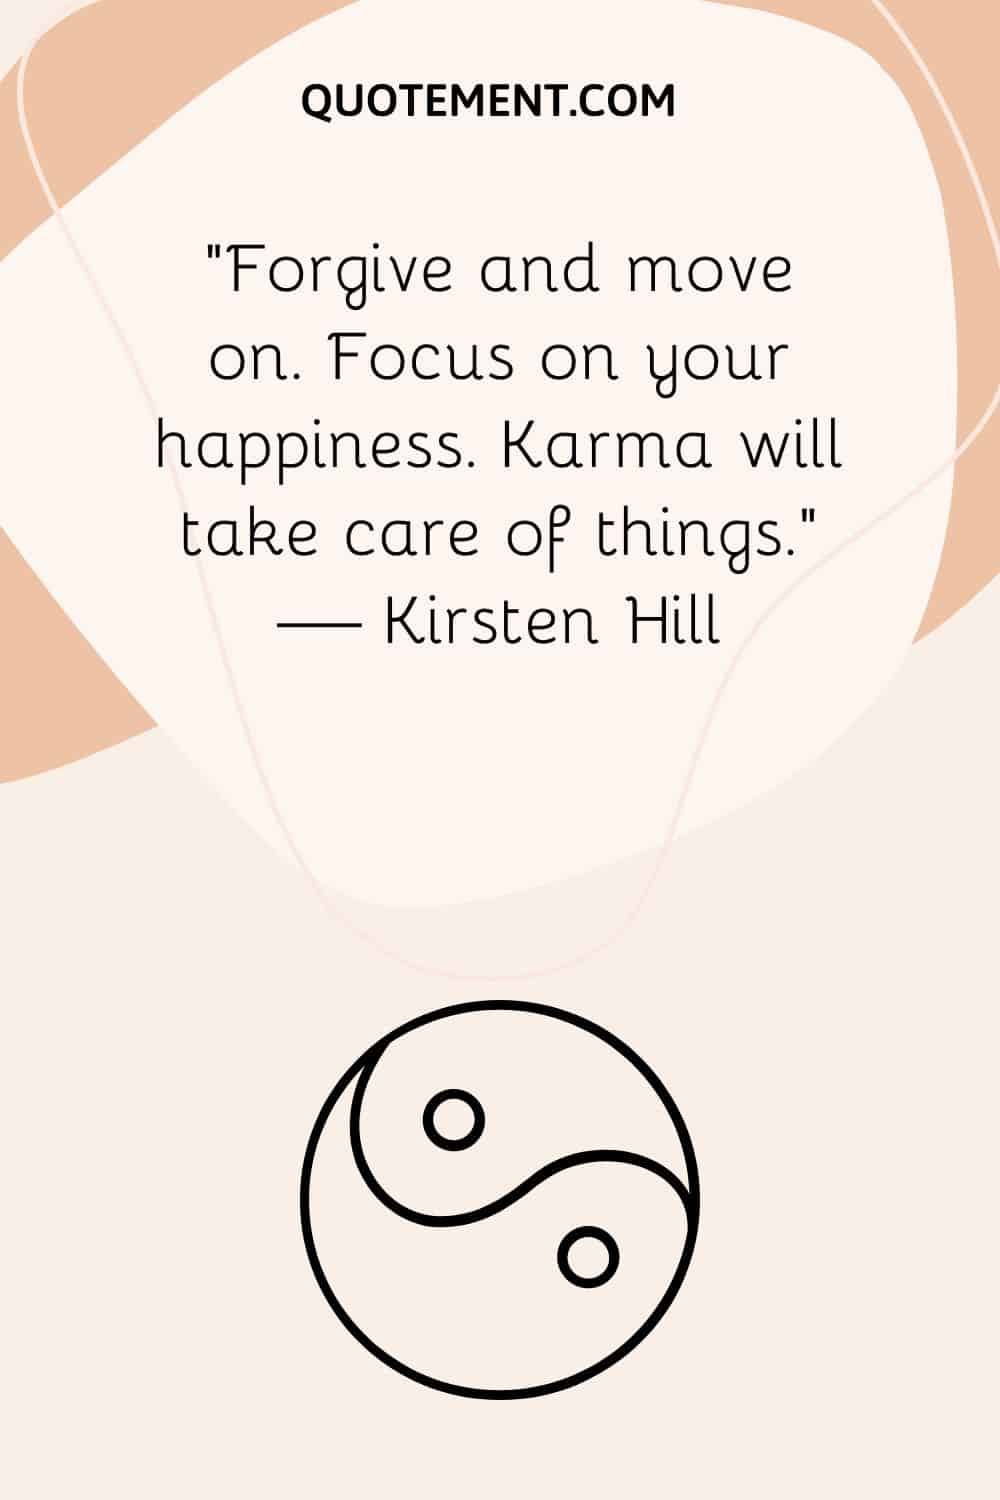 Forgive and move on. Focus on your happiness. Karma will take care of things